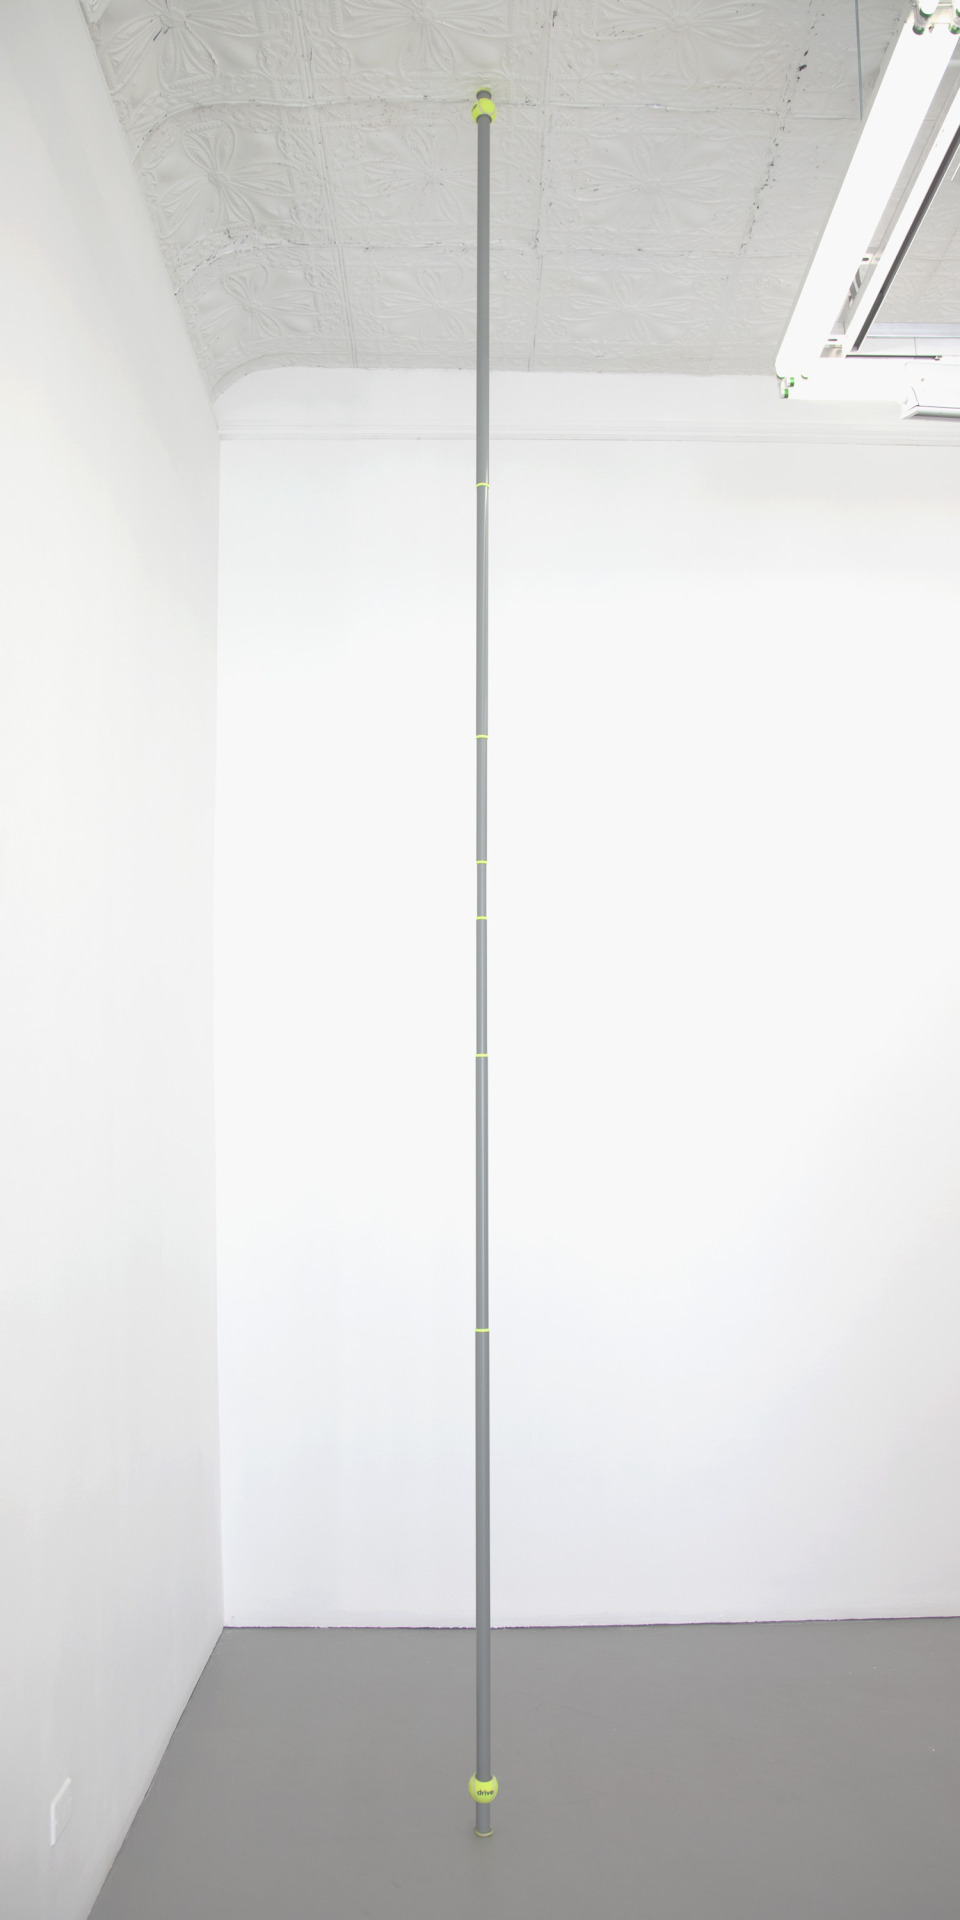 Image 1: Chadwick Rantanen
Telescopic Pole (Drive Medical/Grey), 2012
Powdercoated aluminum, plastic, walkerballs
Variable up to 296h x 1.5w in
CRMA1302






Image 2: Chadwick Rantanen
Telescopic Pole (Drive Medical/Grey), 2012
CRMA1302
(detail)






Chadwick Rantanen (b. 1981, Wisconsin)
Los Angeles-based Chadwick Rantanen is well known for his sculptural works involving “walker balls&quot; and telescopic aluminum poles. Rantanen’s work is very cerebral by nature.  When Chadwich Rantanen set out to create these works, his intentions were pure: “to make a work of art that was entirely benign, one that left no physical trace in the space it was exhibited and which could be adapted to the dimensions of any average-sized gallery&quot; (taken from Standard (Oslo)’s Press Release). Each piece combines walker balls and telescopic aluminum poles of matching hues, a choice Rantanen has made to demonstrate the efforts Americans put into individualizing everything. “Walker Balls&quot; are only sold in the United States - and from that, all colors and patterns are available from solid primaries to camouflage and stars &amp; stripes. He sourced as many various colors and patterns or walker balls as were available, and allowed the design of the balls to dictate the color of the aluminum poles, thus creating a relationship and system for the series. 
Chadwick Rantanen&rsquo;s first solo show in New York ran from May 5 - June 9th at Essex Street.







